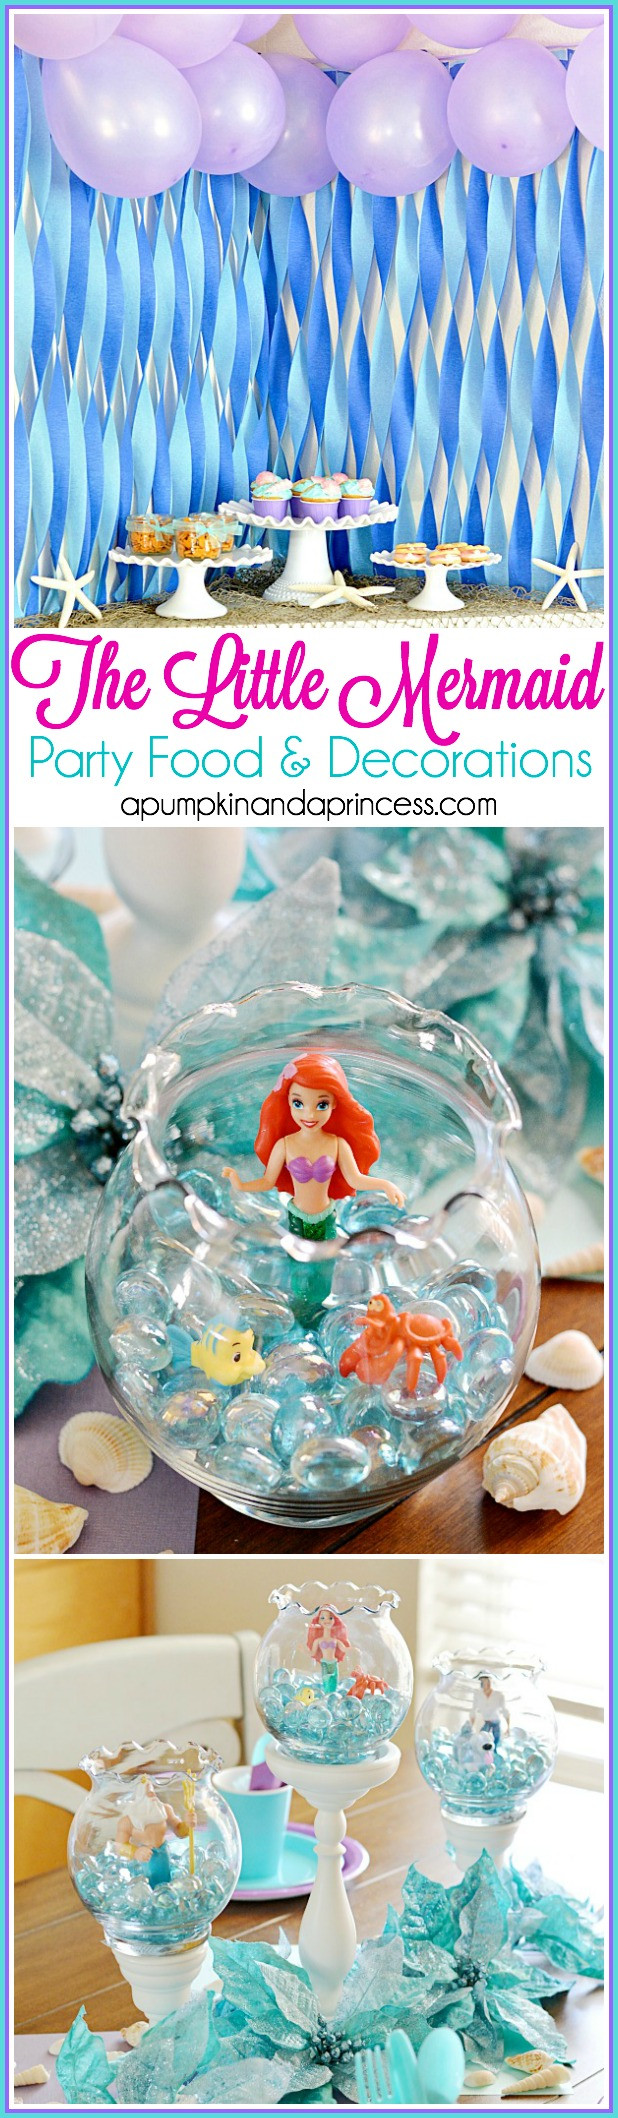 Mermaid Ideas For Party
 The Little Mermaid Party A Pumpkin And A Princess